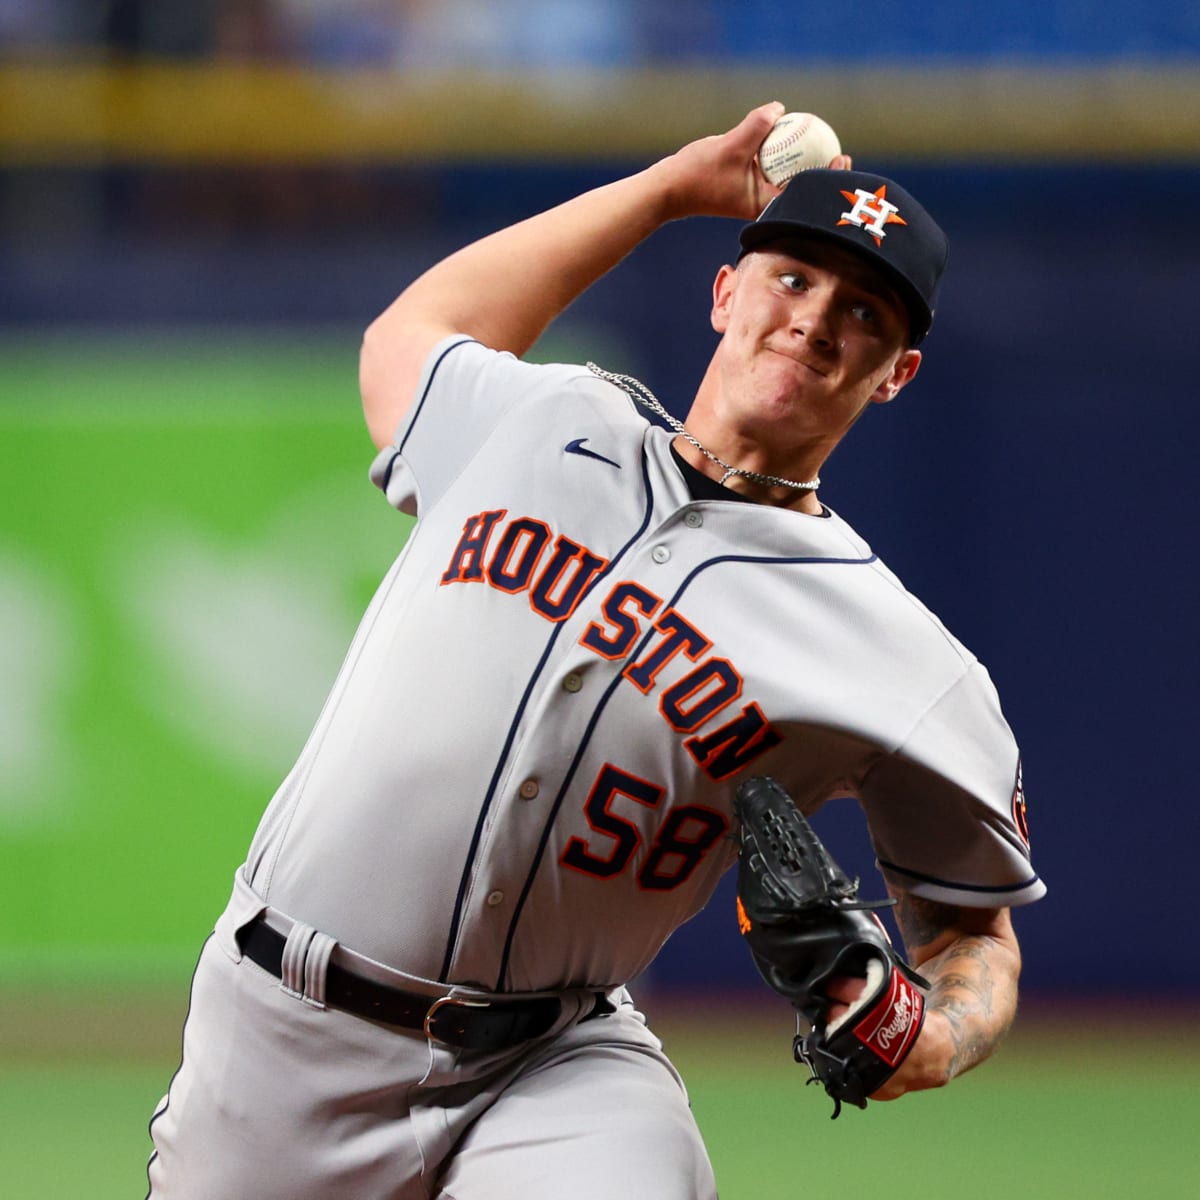 With the 298th Pick of the 2021 MLB Draft, the Houston Astros